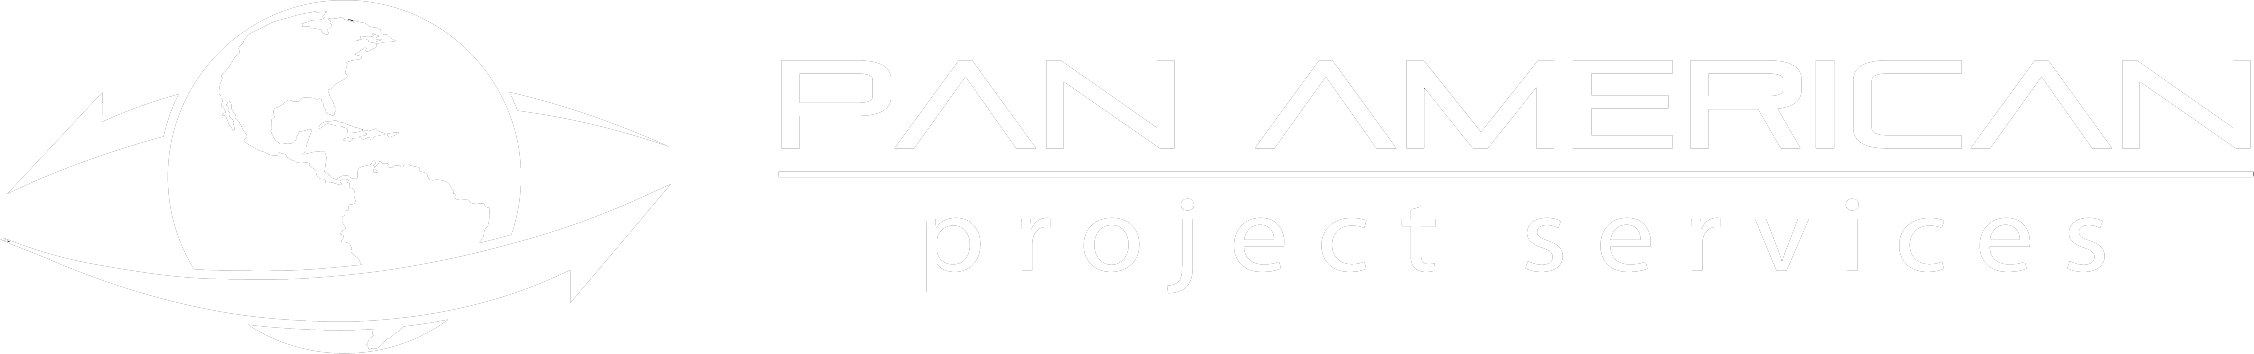 Pan American Project Services